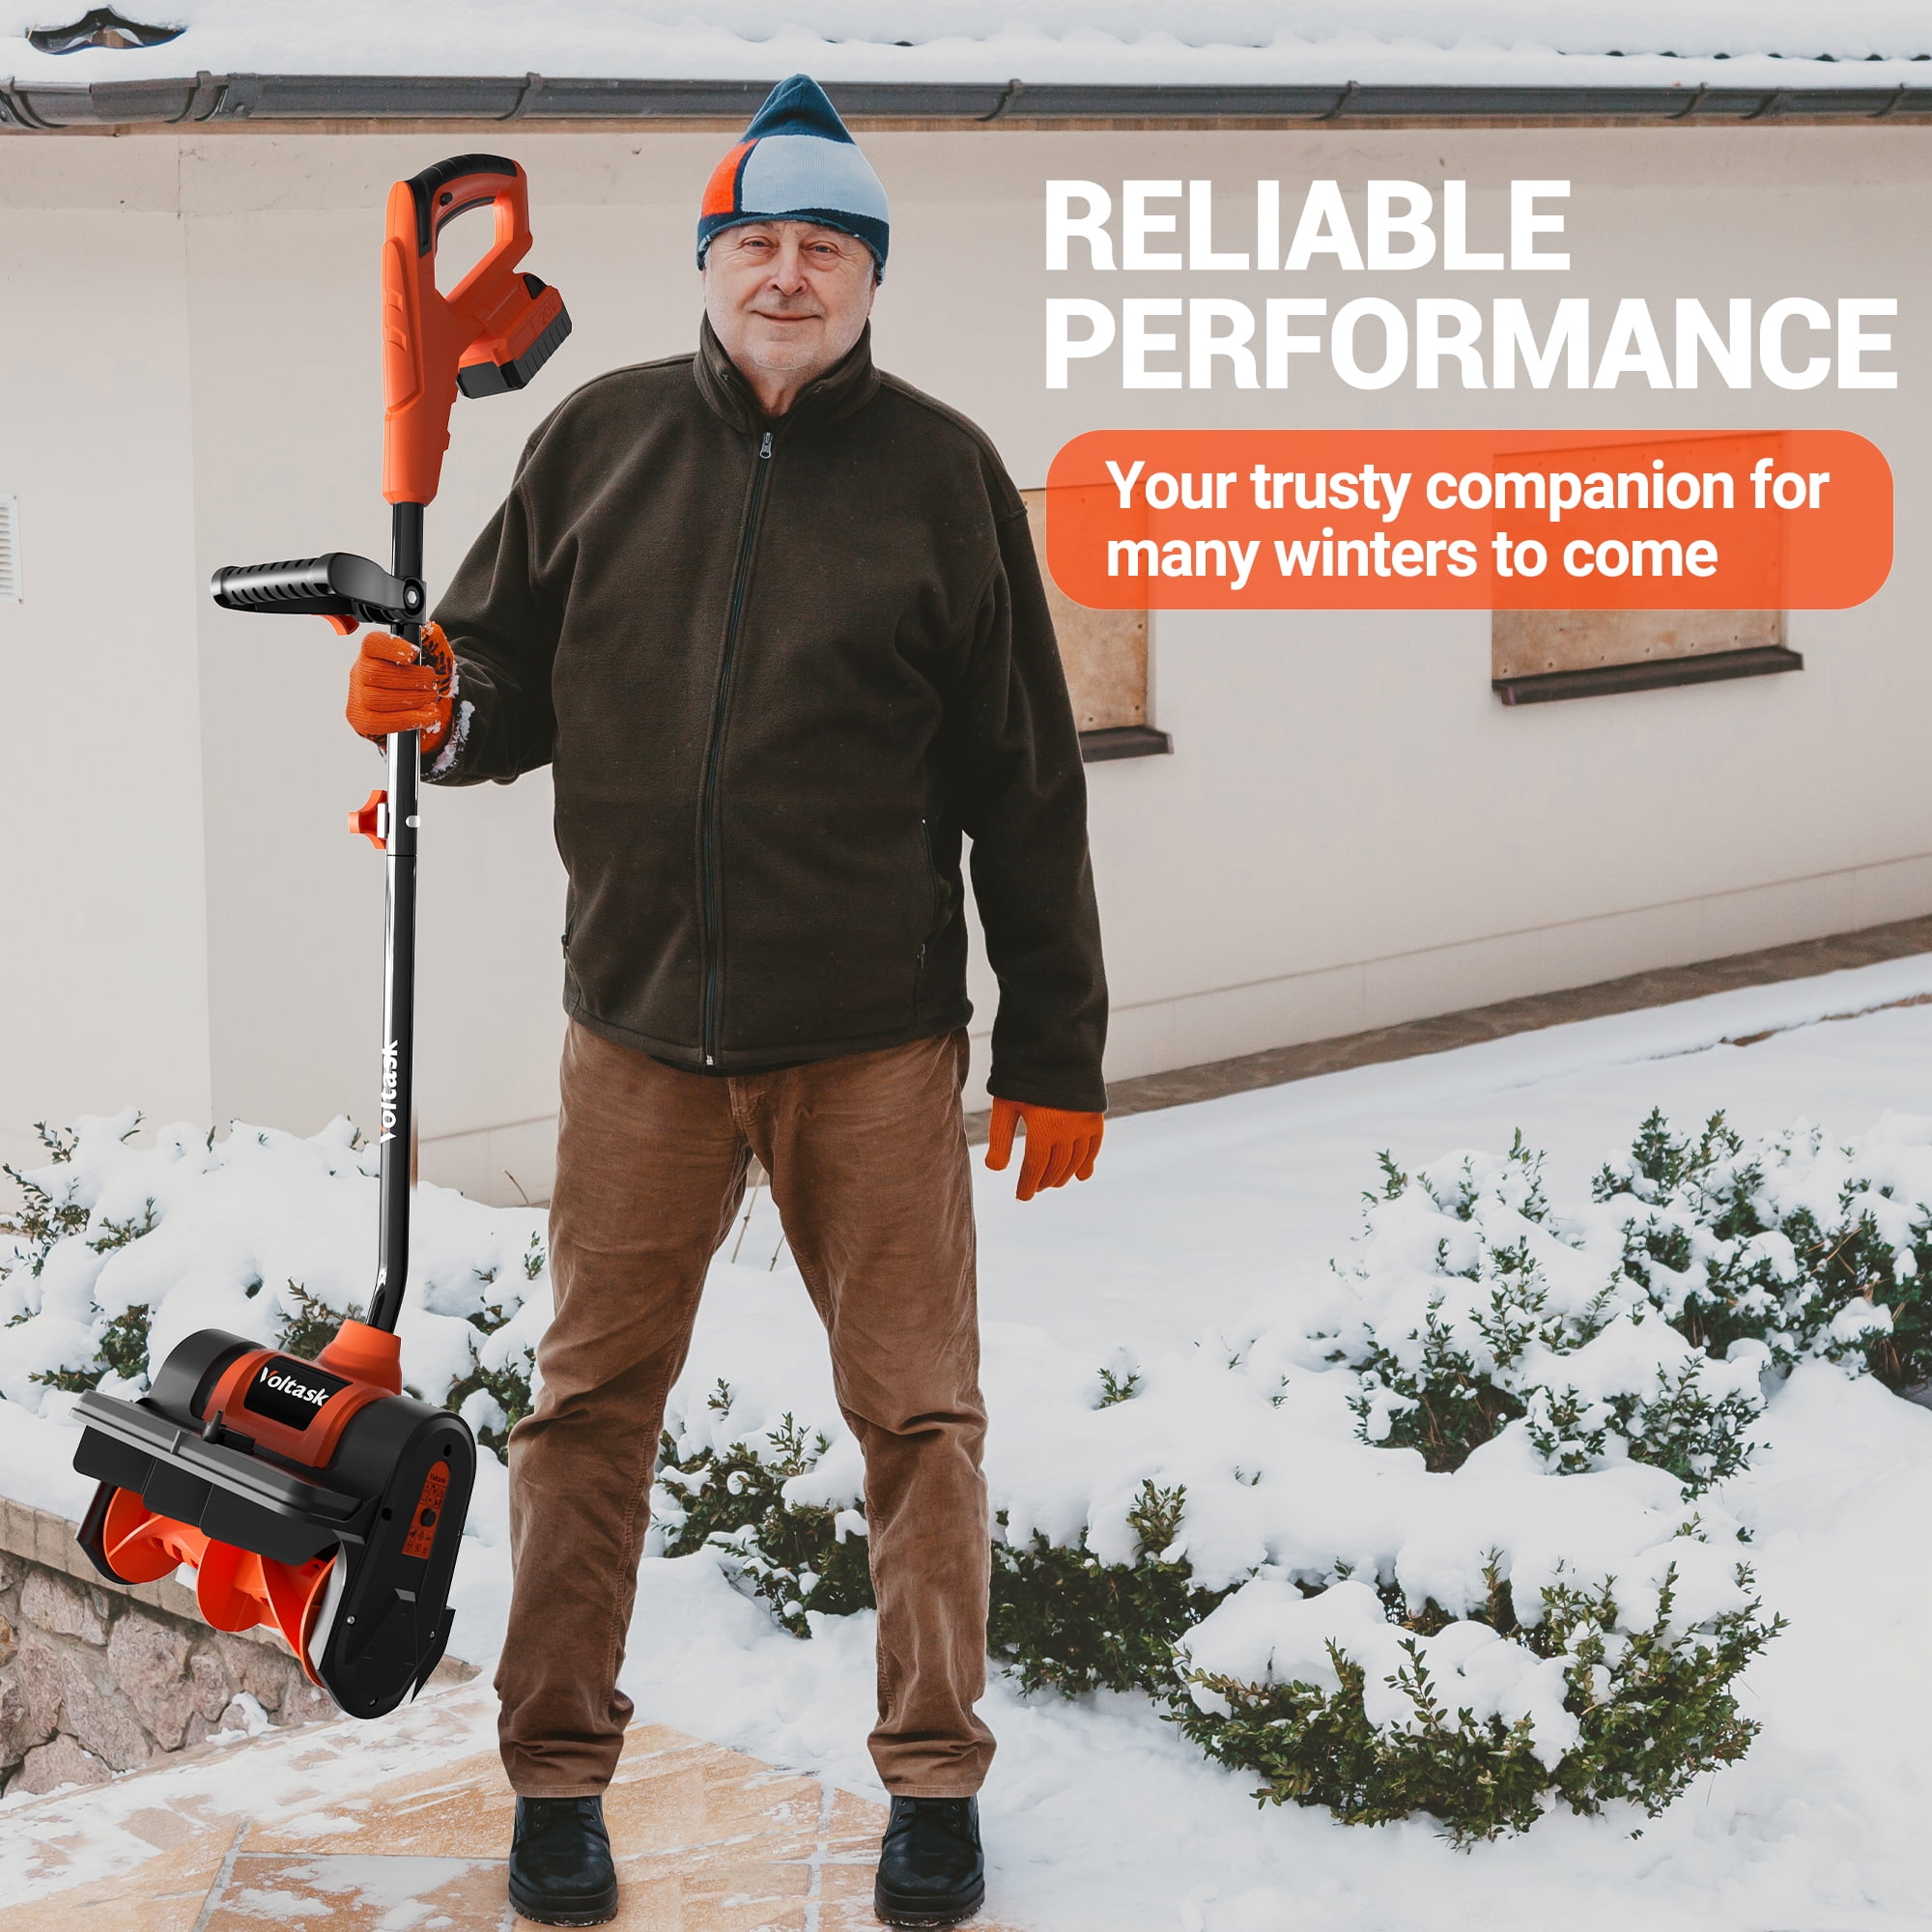 VOLTASK 20V 12-Inch Cordless Snow Shovel with Directional Plate, Battery &  Quick Charger Included